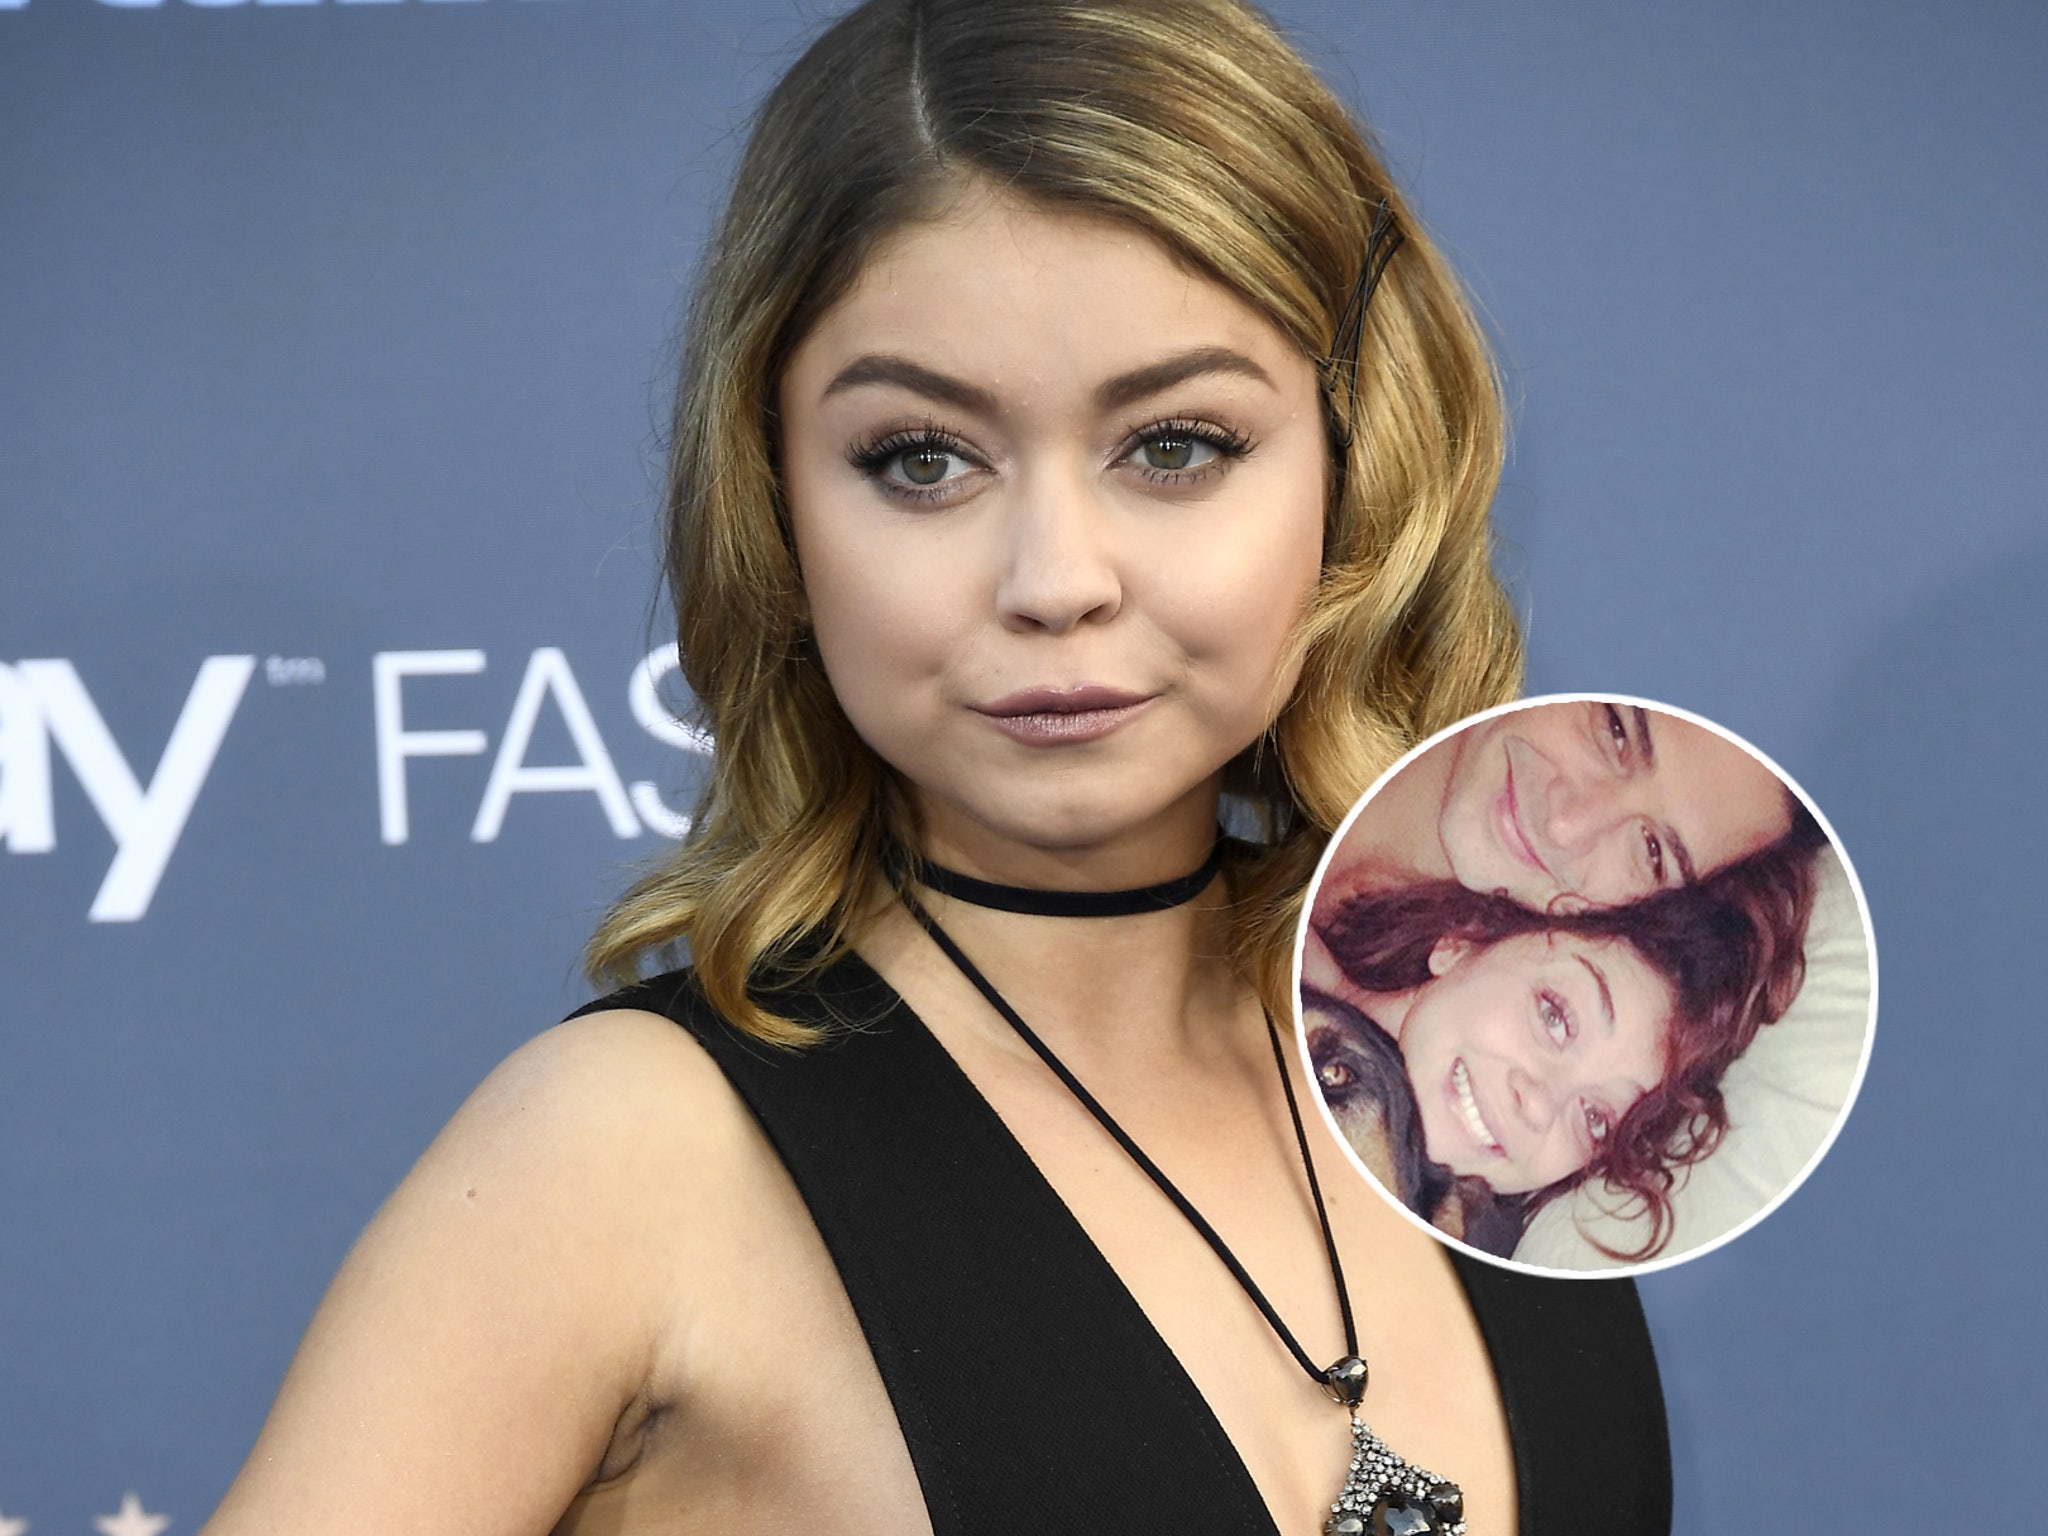 Sarah Hyland Porn - Sarah Hyland Claps Back at Angry Fan Demanding 'KEEP YOUR SEXUAL LIFE  PRIVATE'